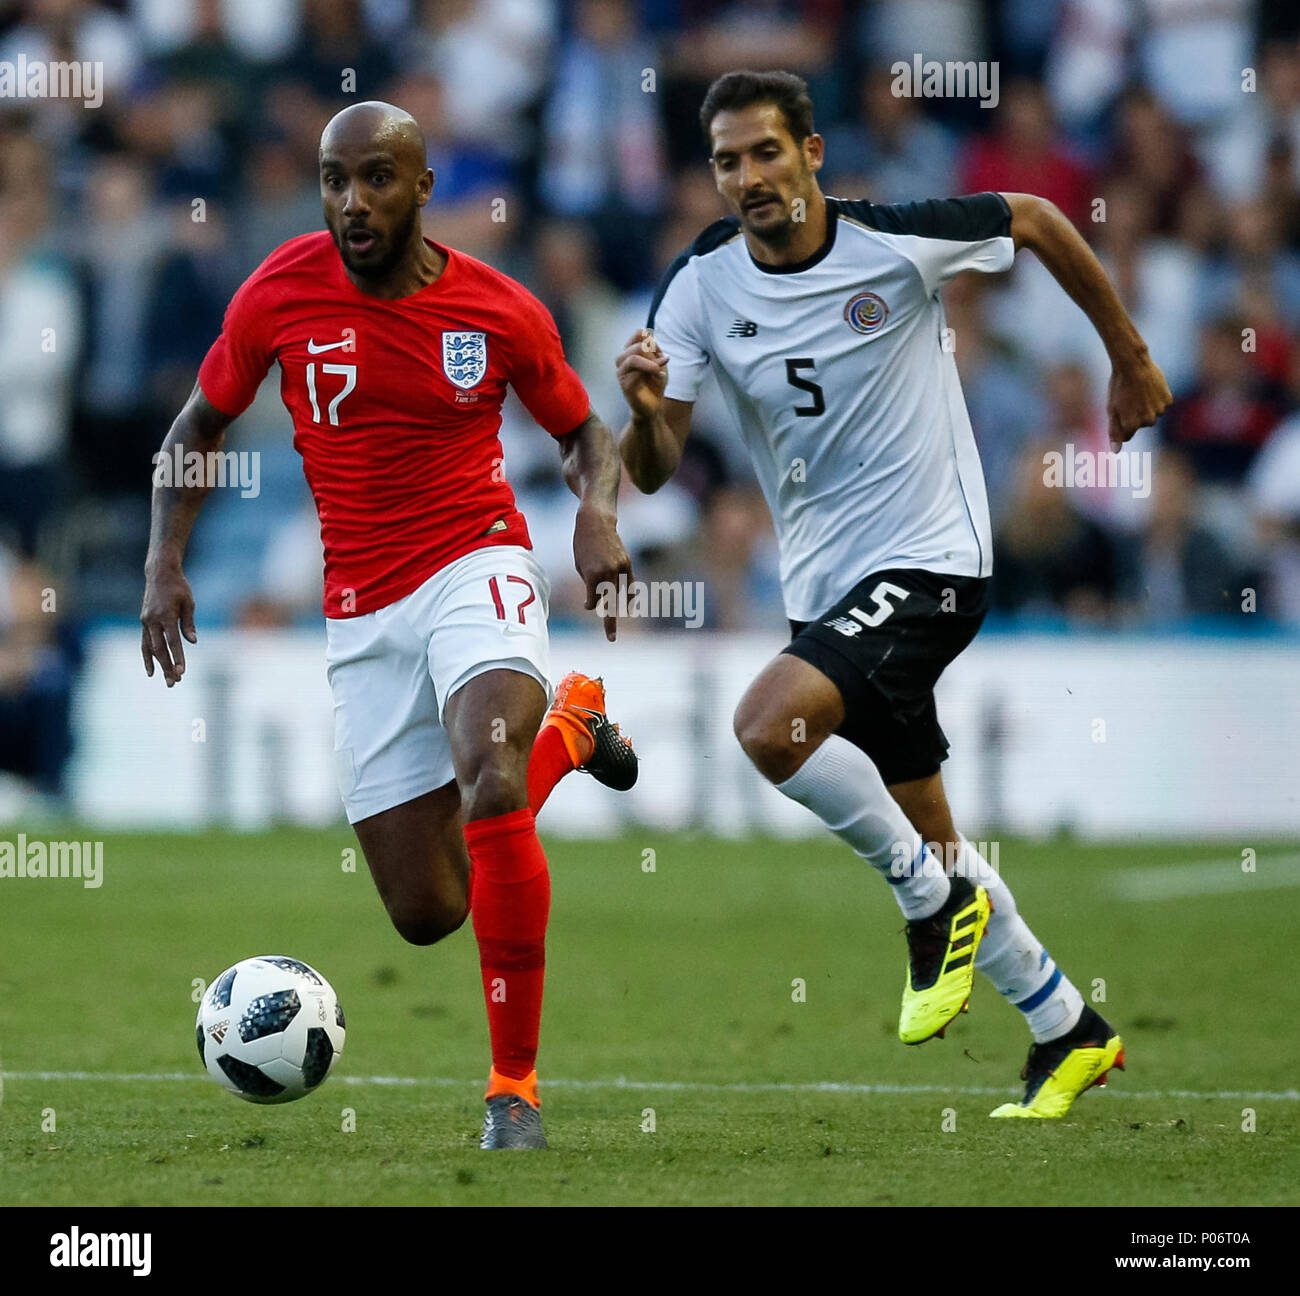 Leeds, UK. 7th Jun, 2018. Fabian Delph of England and Celso Borges of Costa Rica during the International Friendly match between England and Costa Rica at Elland Road on June 7th 2018 in Leeds, England. (Photo by Daniel Chesterton/phcimages.com) Credit: PHC Images/Alamy Live News Stock Photo